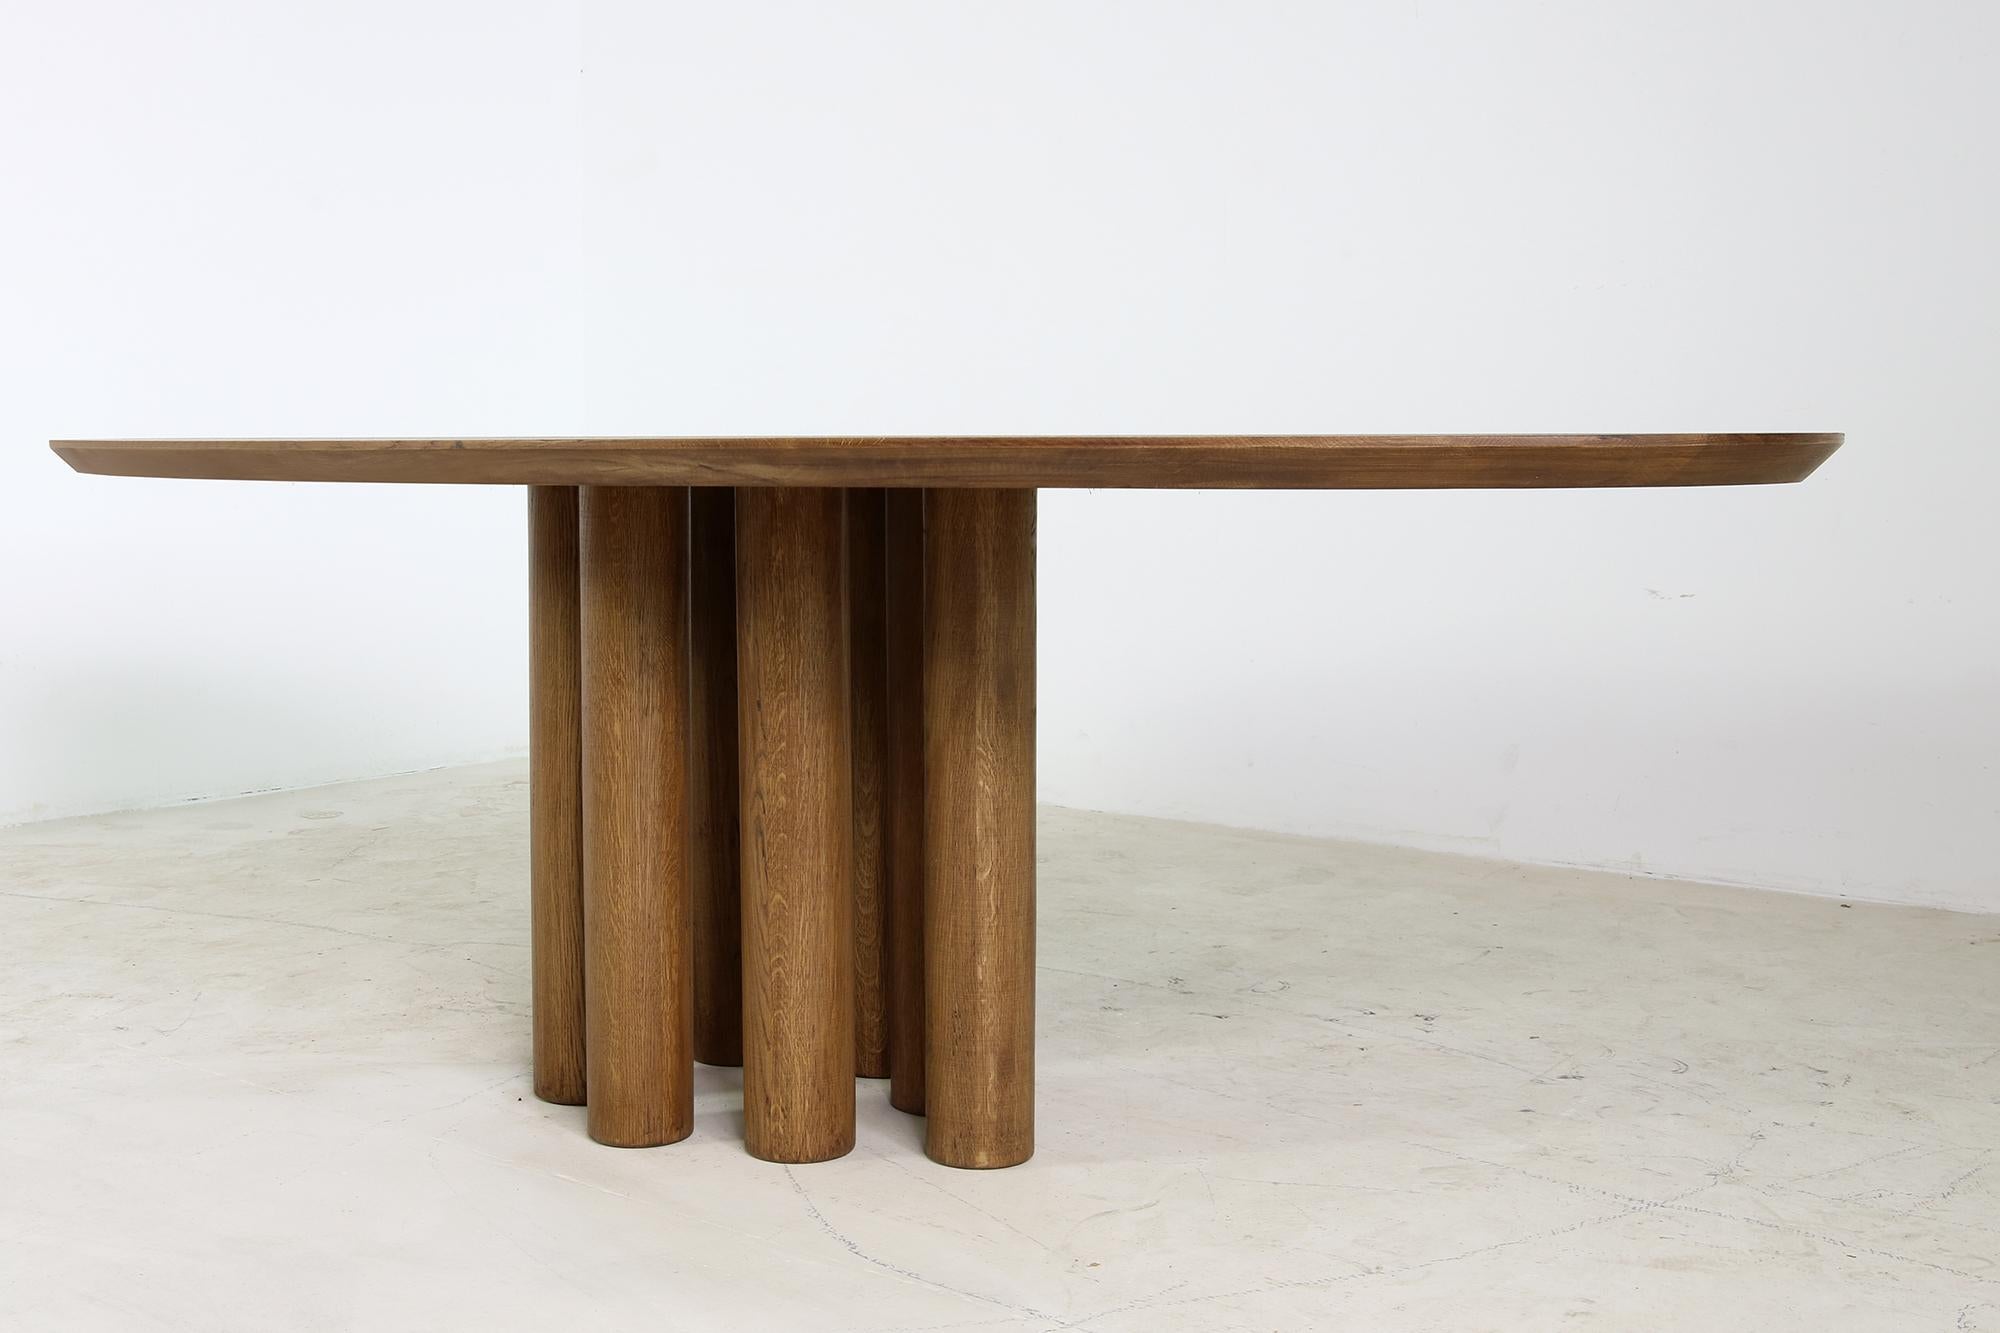 Beautiful contemporary Nathan Lindberg table, heavyweight. This piece can be used as a dining table for 8-10 persons, or as a conference table, or even a large free standing desk.
Beautiful oval, elliptical shape, solid oak base. Measures here: 240